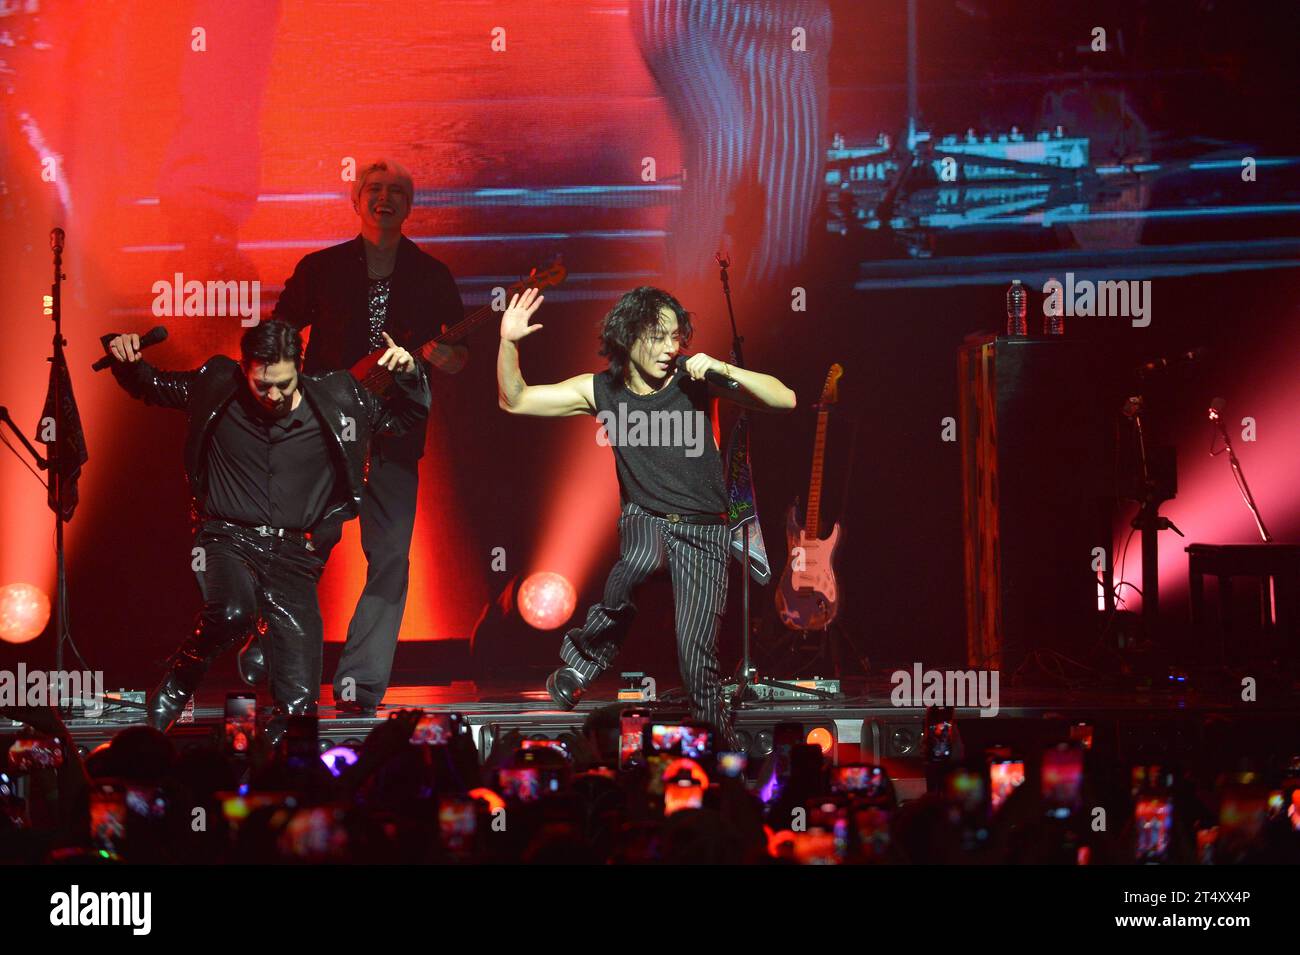 Miami, Florida, USA. 31st Oct, 2023. Park Do-joon, Lee Jae-hyeong and Kim Woo-sung of Korean indie rock band THE ROSE perform live onstage during the ' Dawn to Dusk Tour' at James L. Knight Center on October 31, 2023 in Miami, Florida. Credit: Mpi10/Media Punch/Alamy Live News Stock Photo